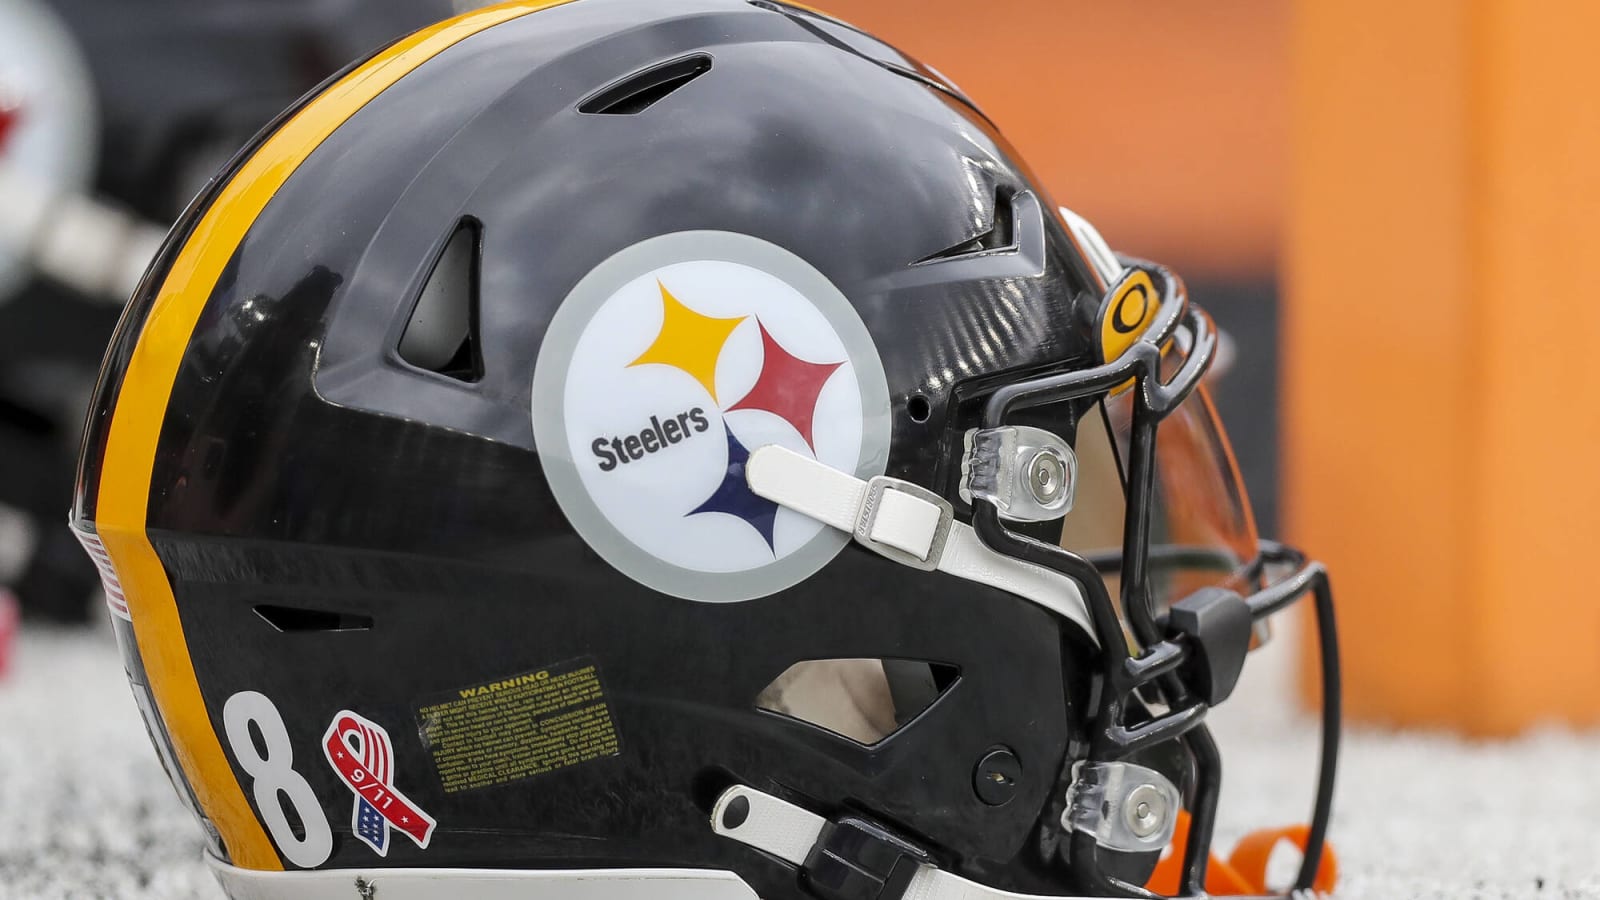 Report: Pittsburgh on Shortlist for 2026 NFL Draft